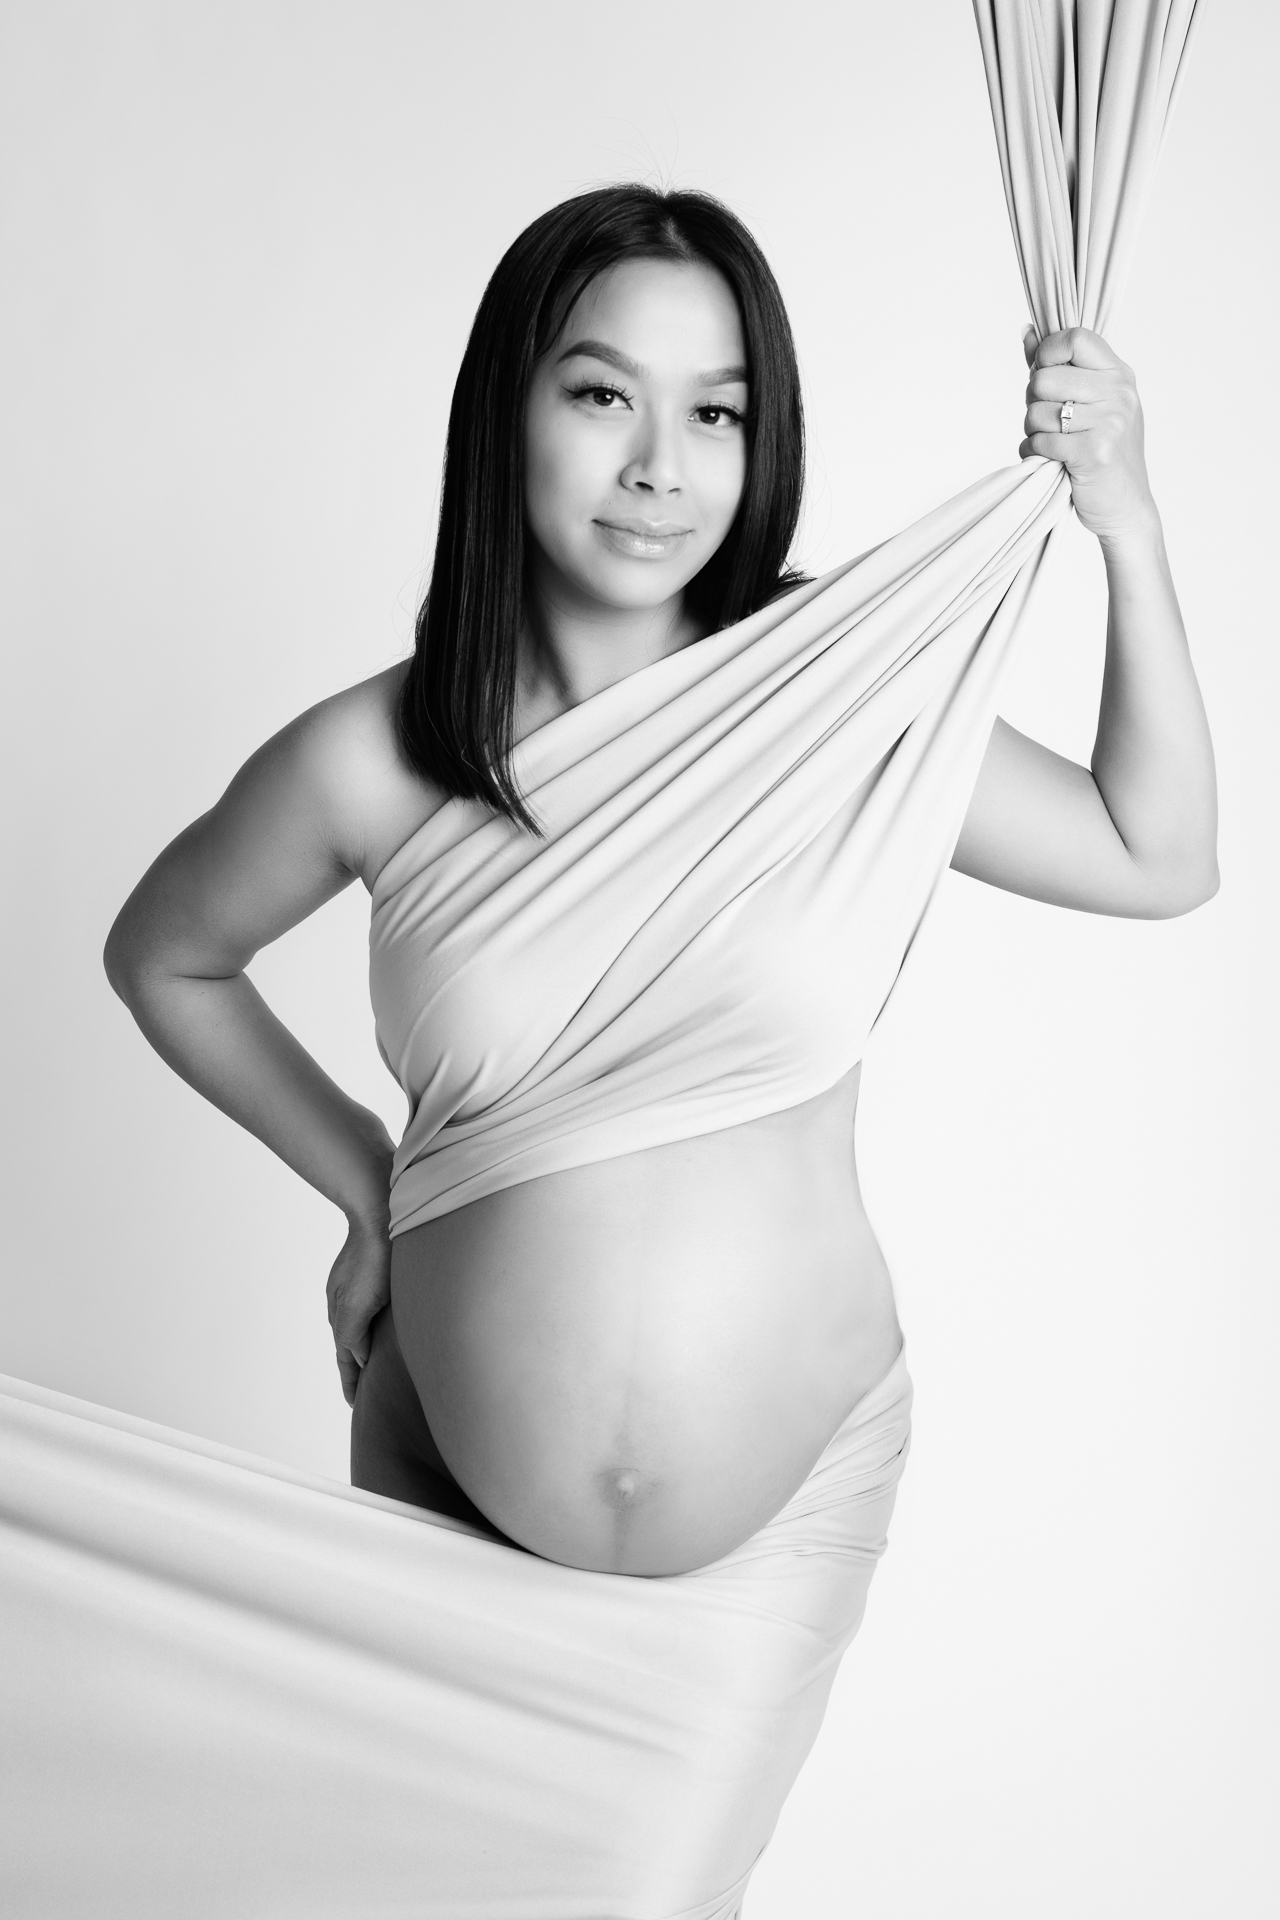 Pregnant woman wears light fabric on white backdrop, black and white image